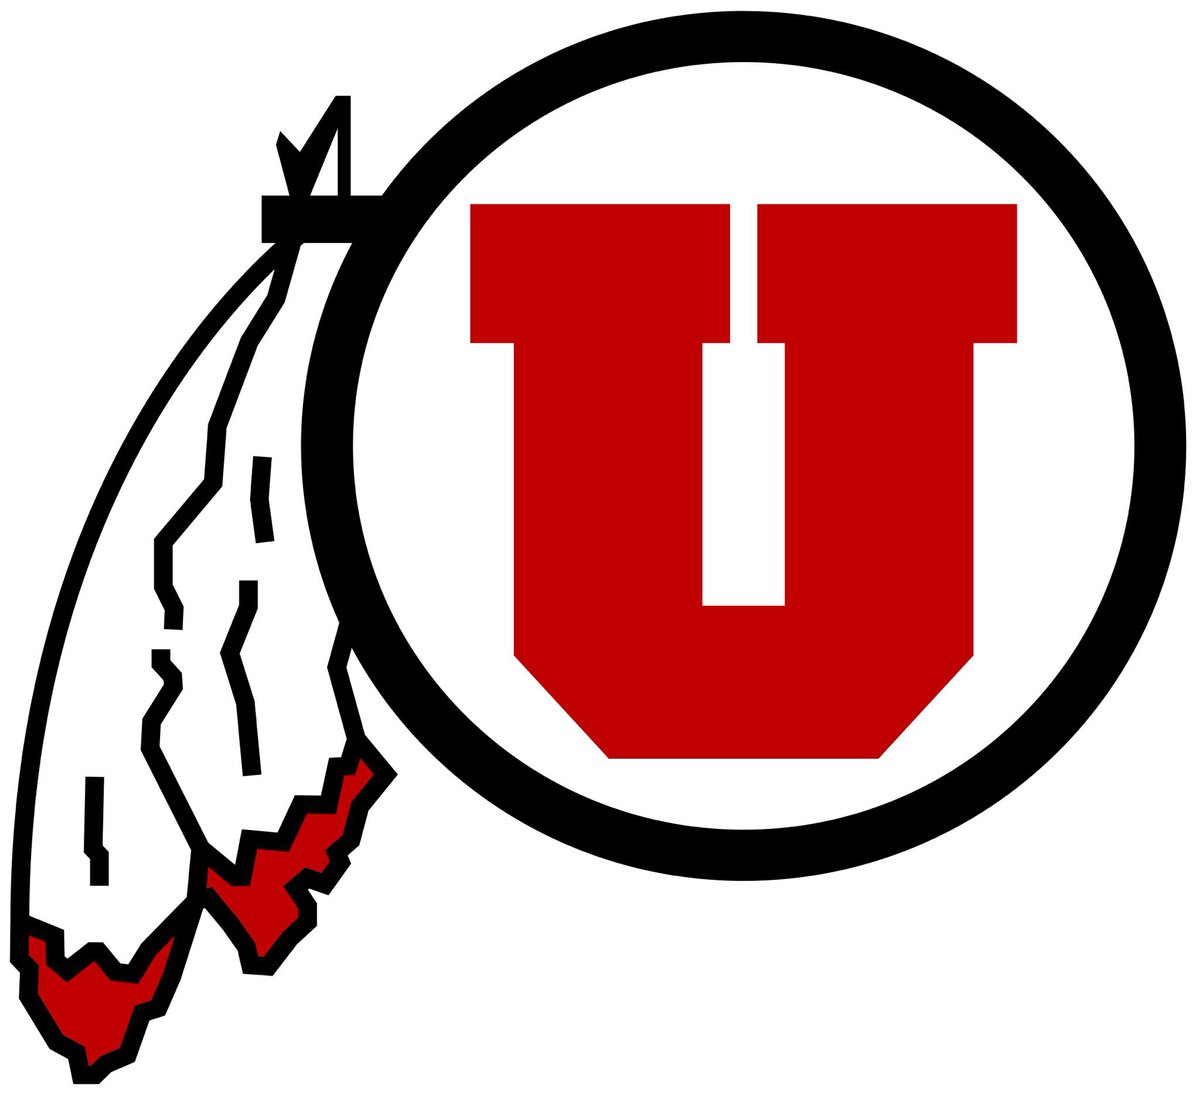 Blessed to receive an offer from the University of Utah!! All glory to god!!